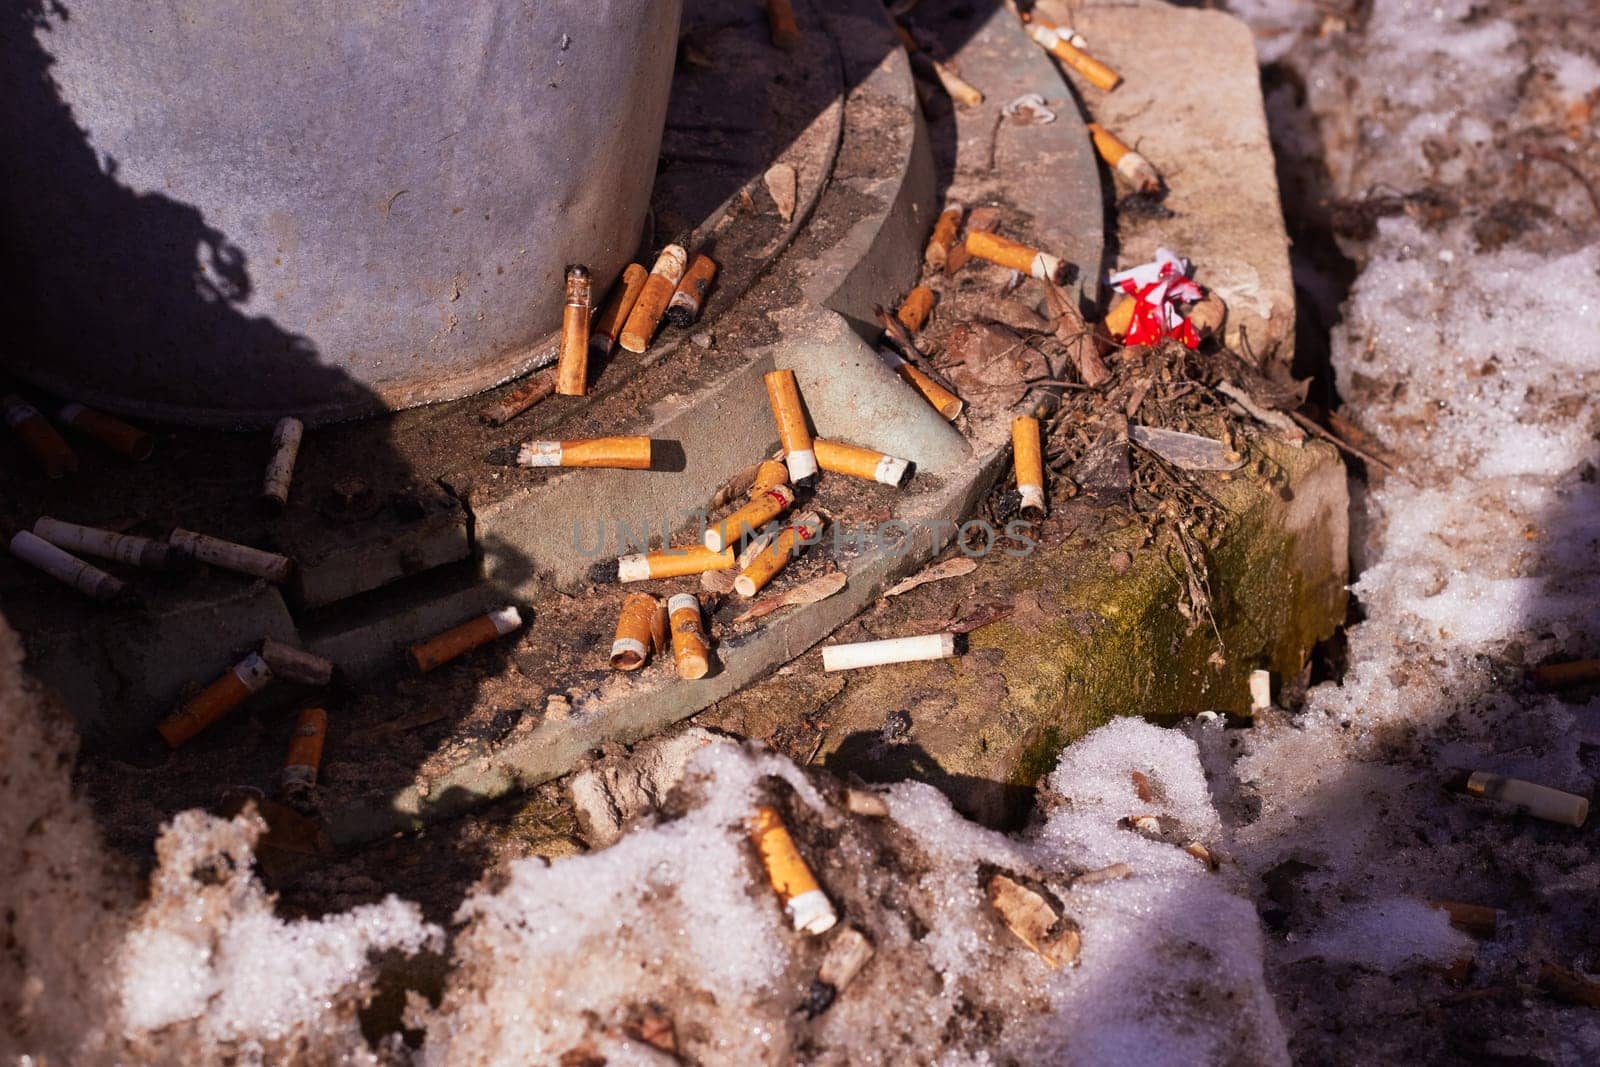 A lot of cigarette butts next to the manhole cover after the snow melts. Landscaping. Garbage. Environmental pollution. Harm to health. Environmental problems.